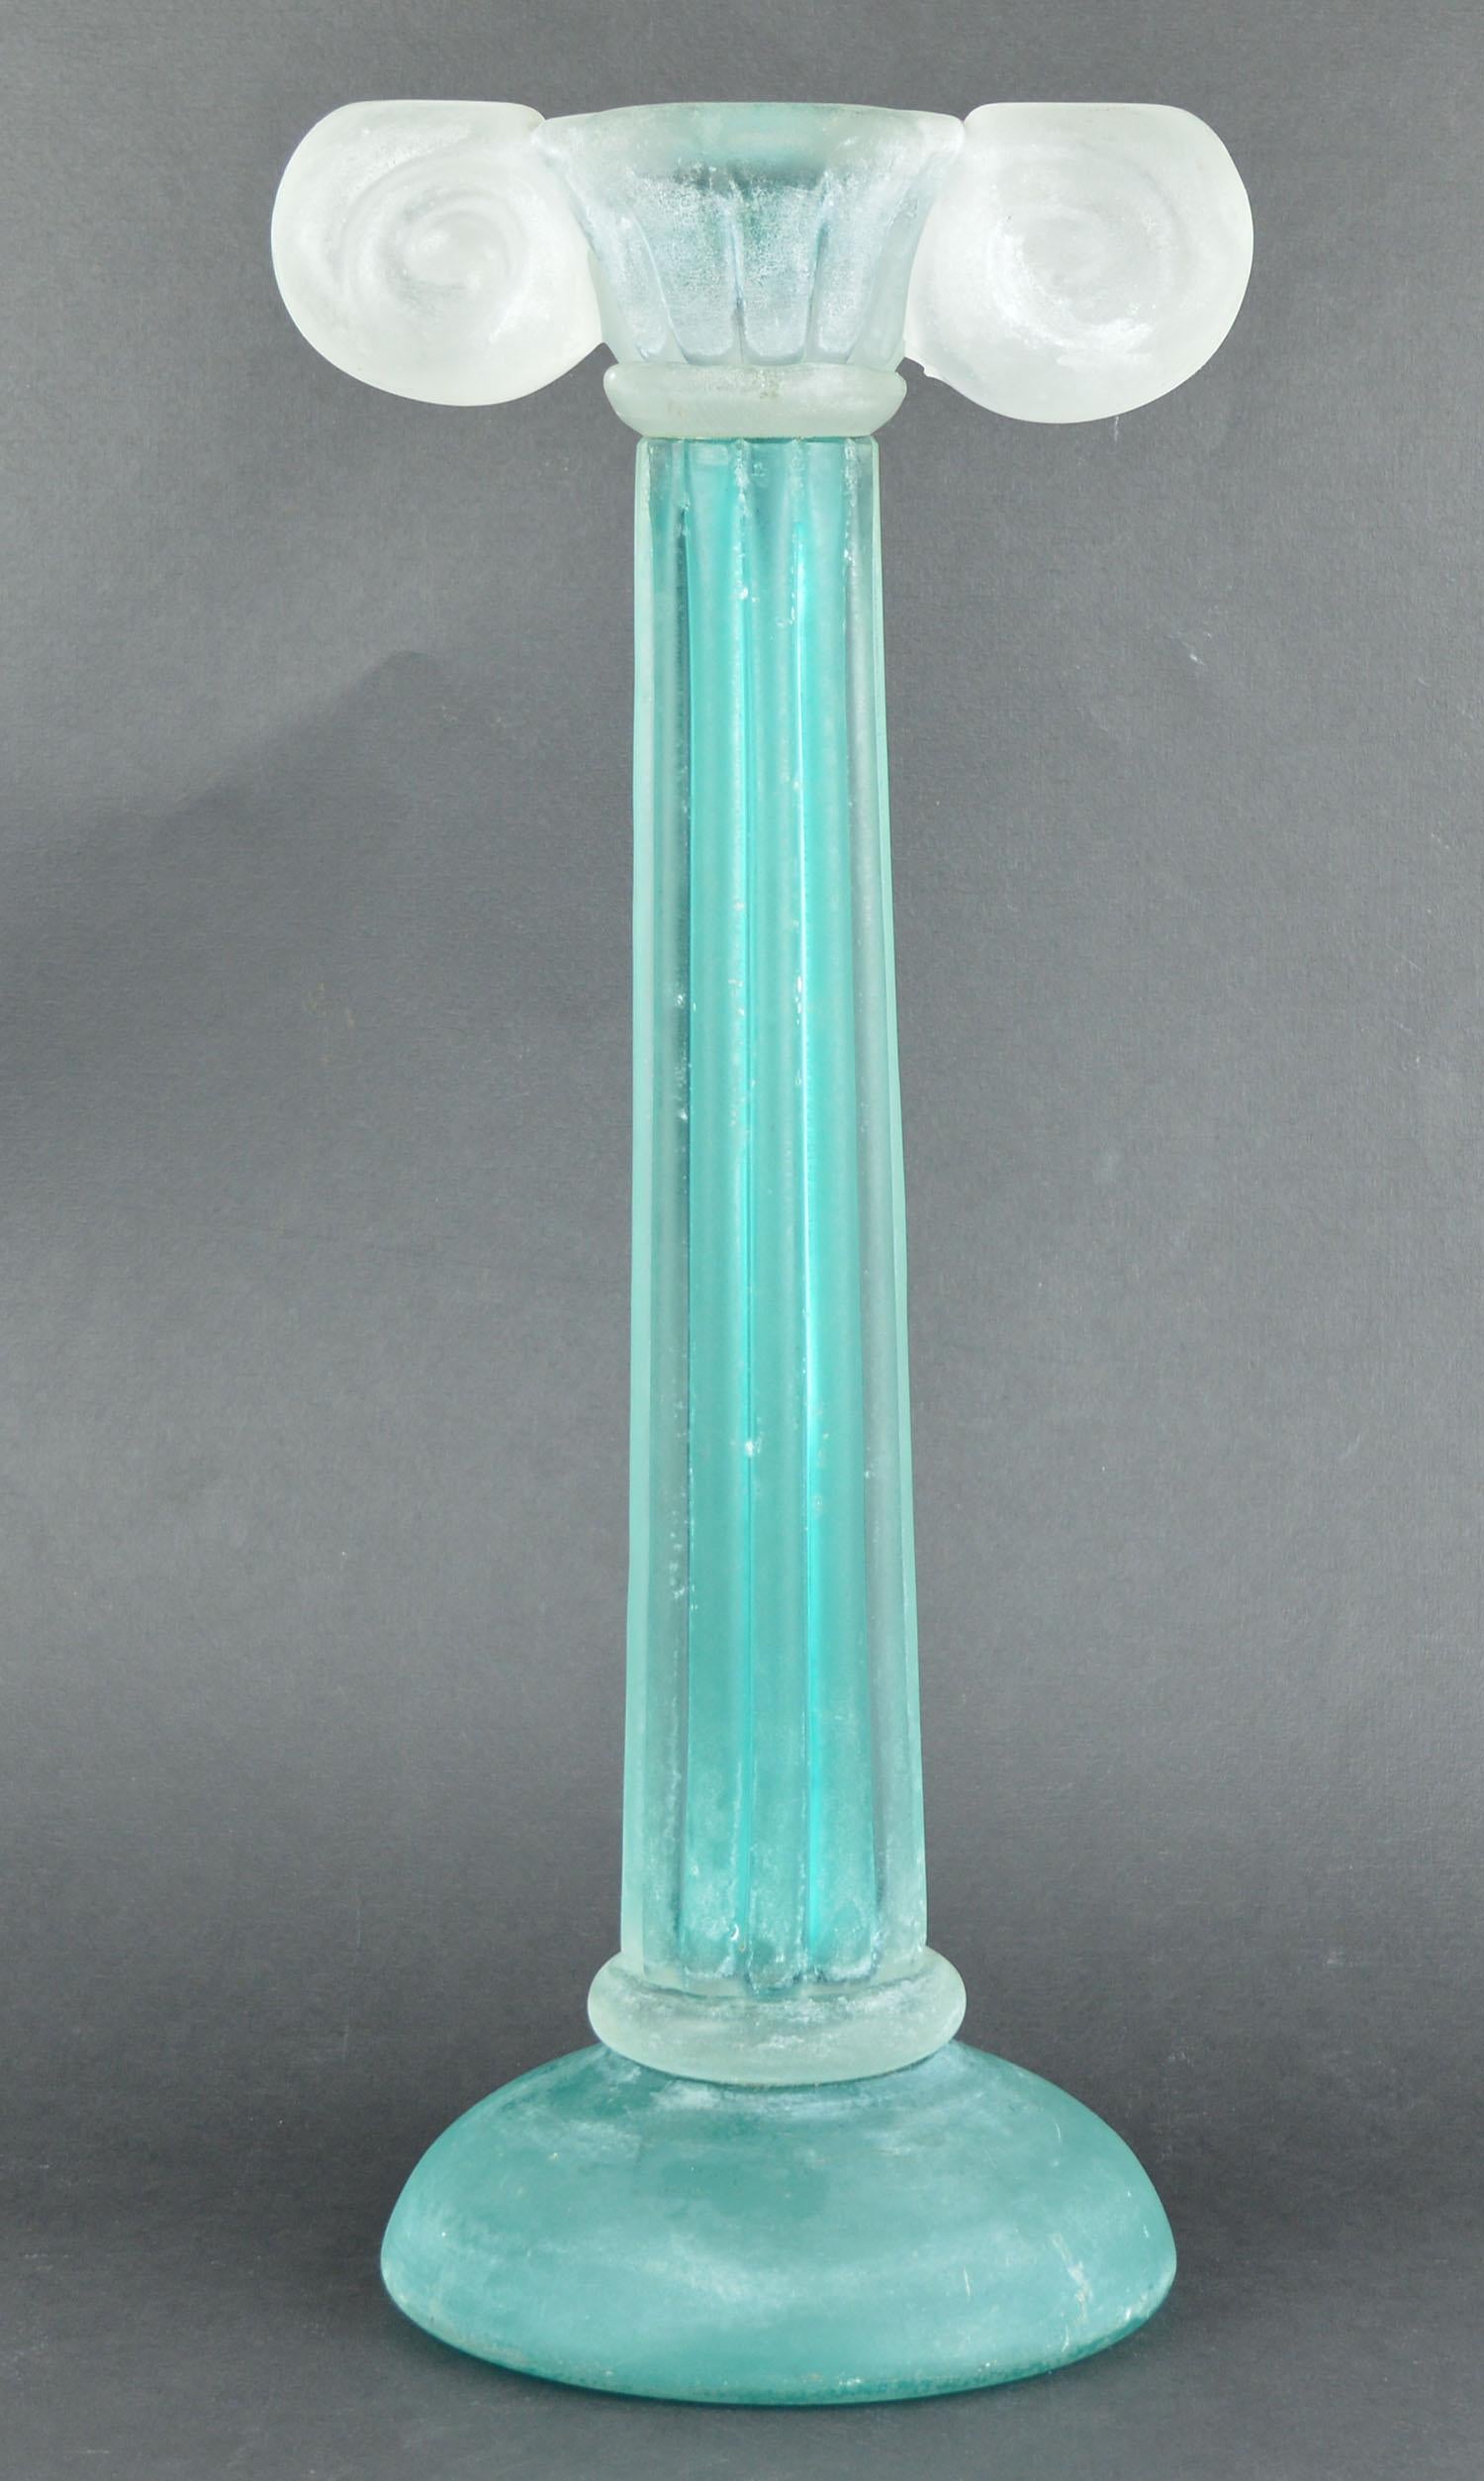 A beautiful frosted glass column candlestick that can be easily converted to a lamp

Wonderful color of turquoise.

Signed on the base 